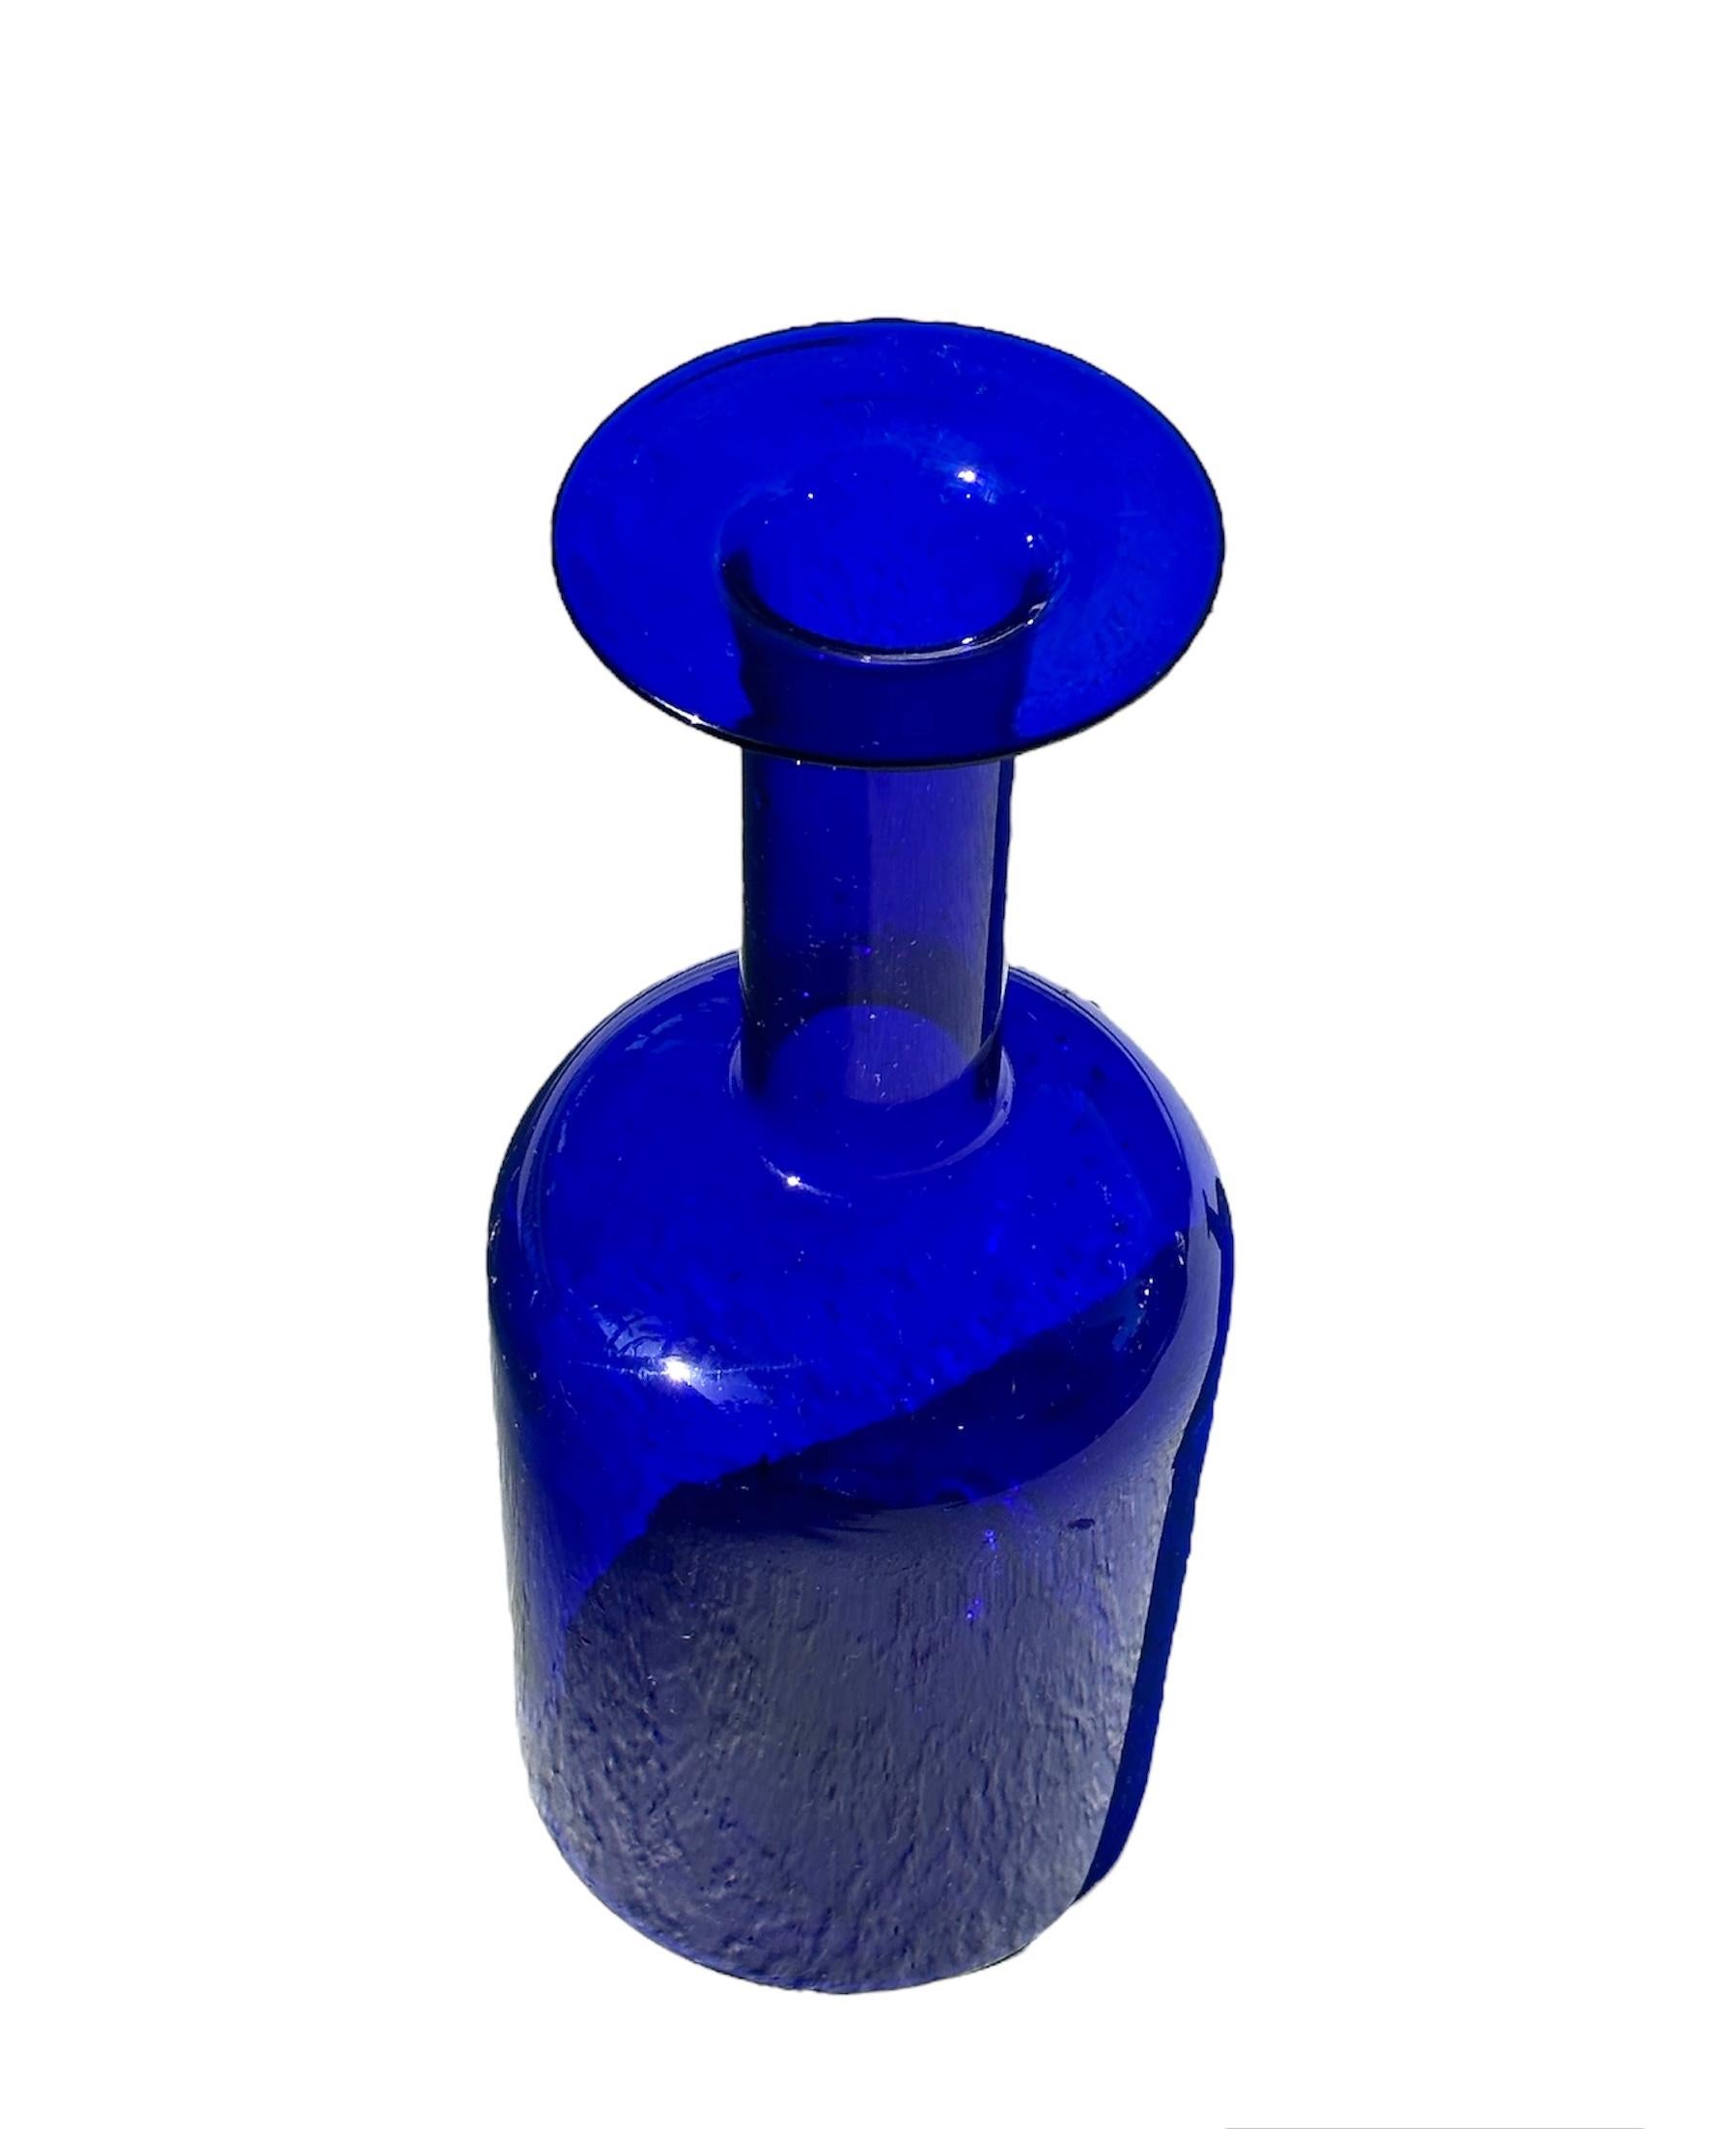 In style of “Otto Brauer for Holmegaard cobolt Blue Vase is striking and in fabulous condition. Lines are clean and color is brilliant cobalt blue.

Packing fee included.